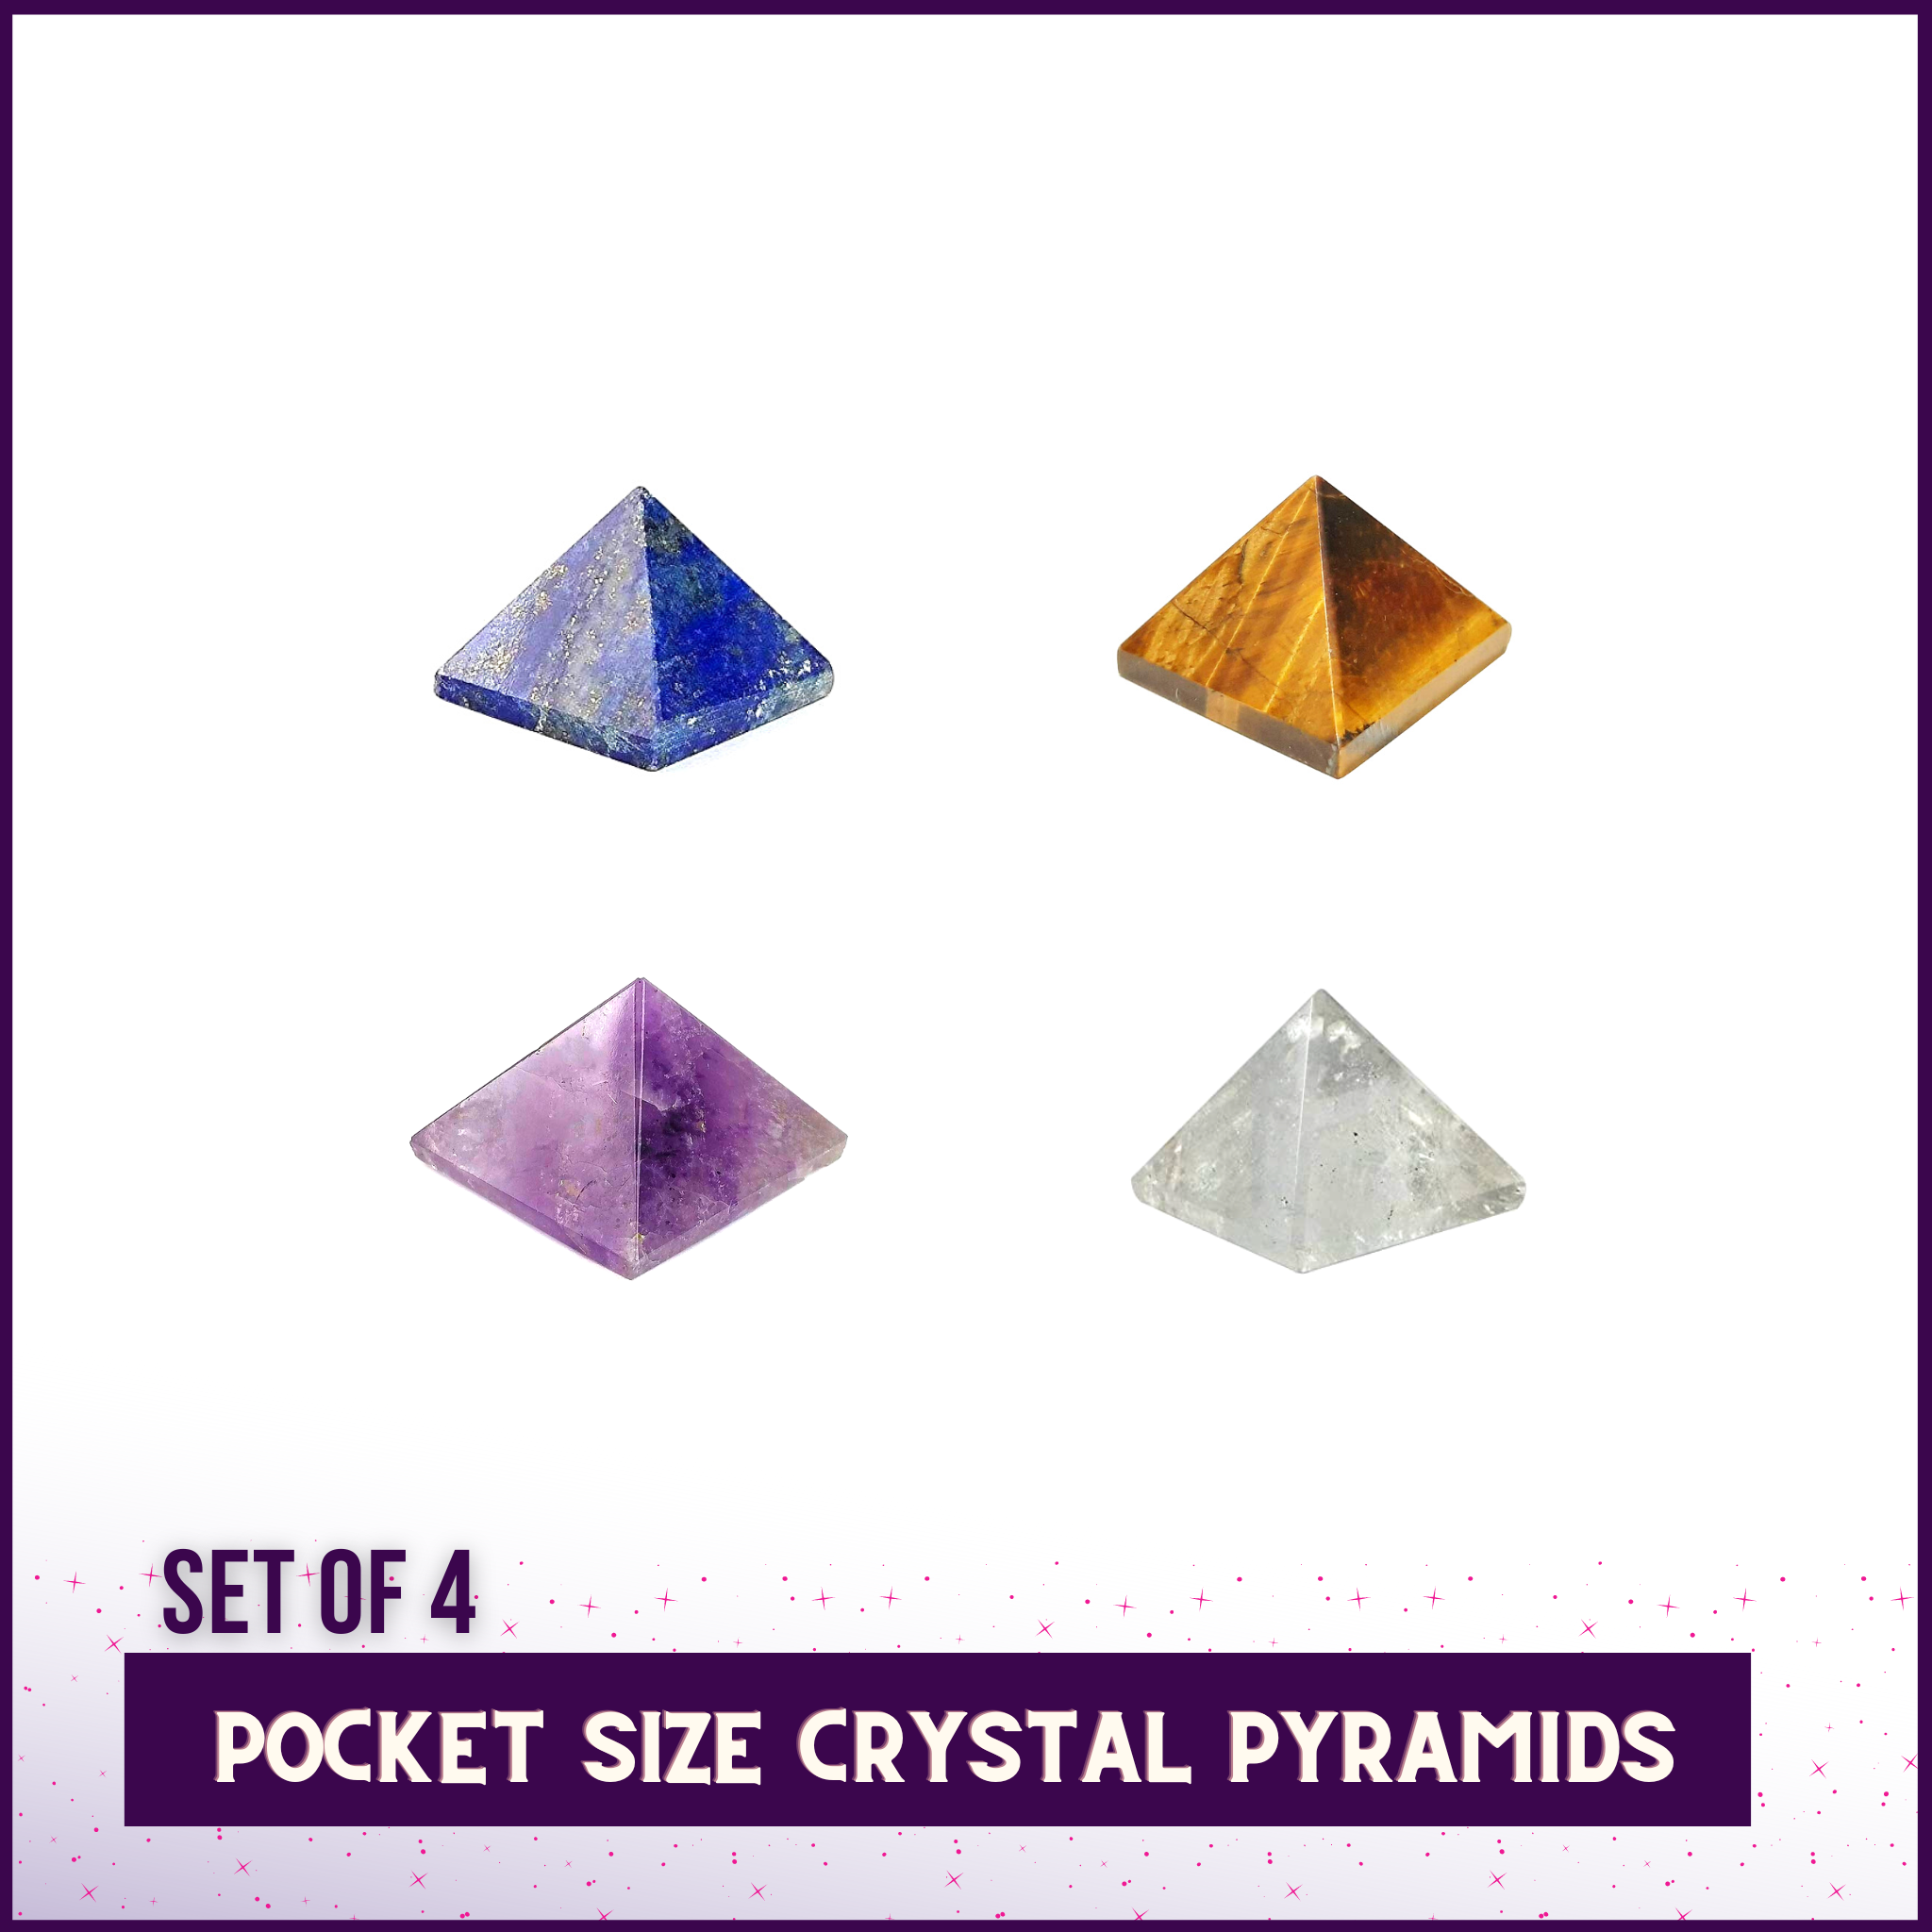 Pocket Size Portable Crystal Pyramids(10mm) For Wallets, Clutches & Handbags - Set of 4-2